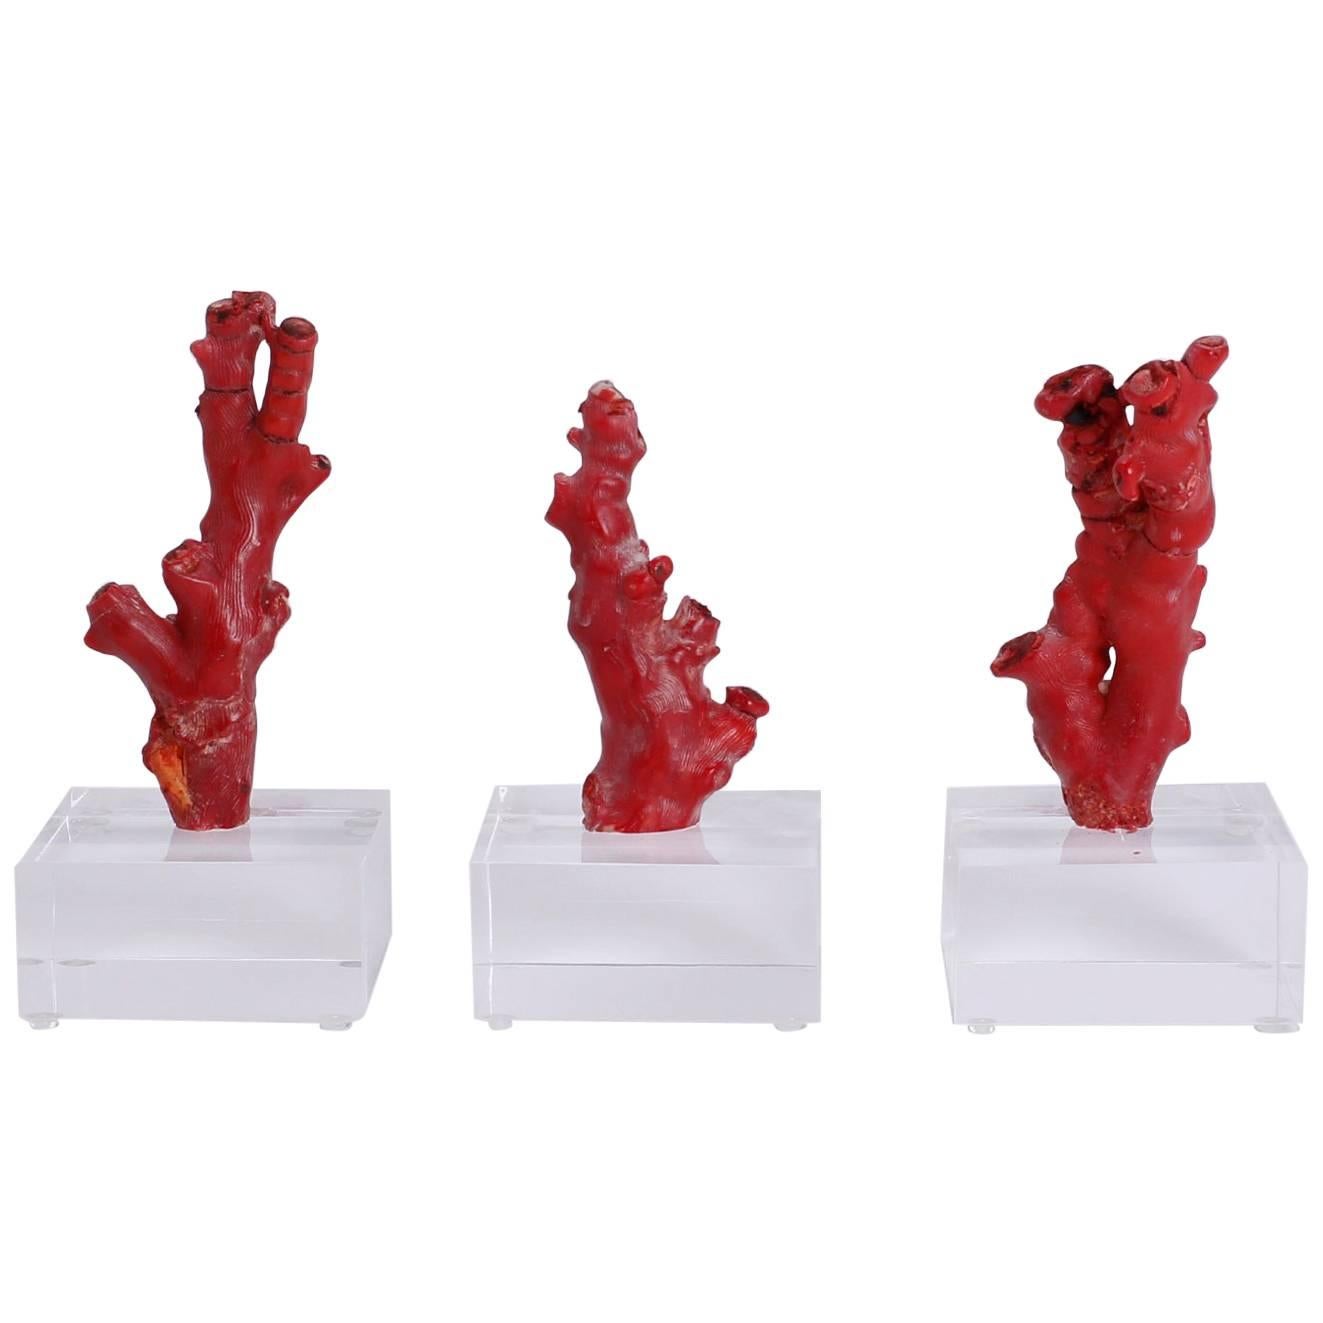 Three Red Coral Specimens Mounted on Lucite, Priced Individually